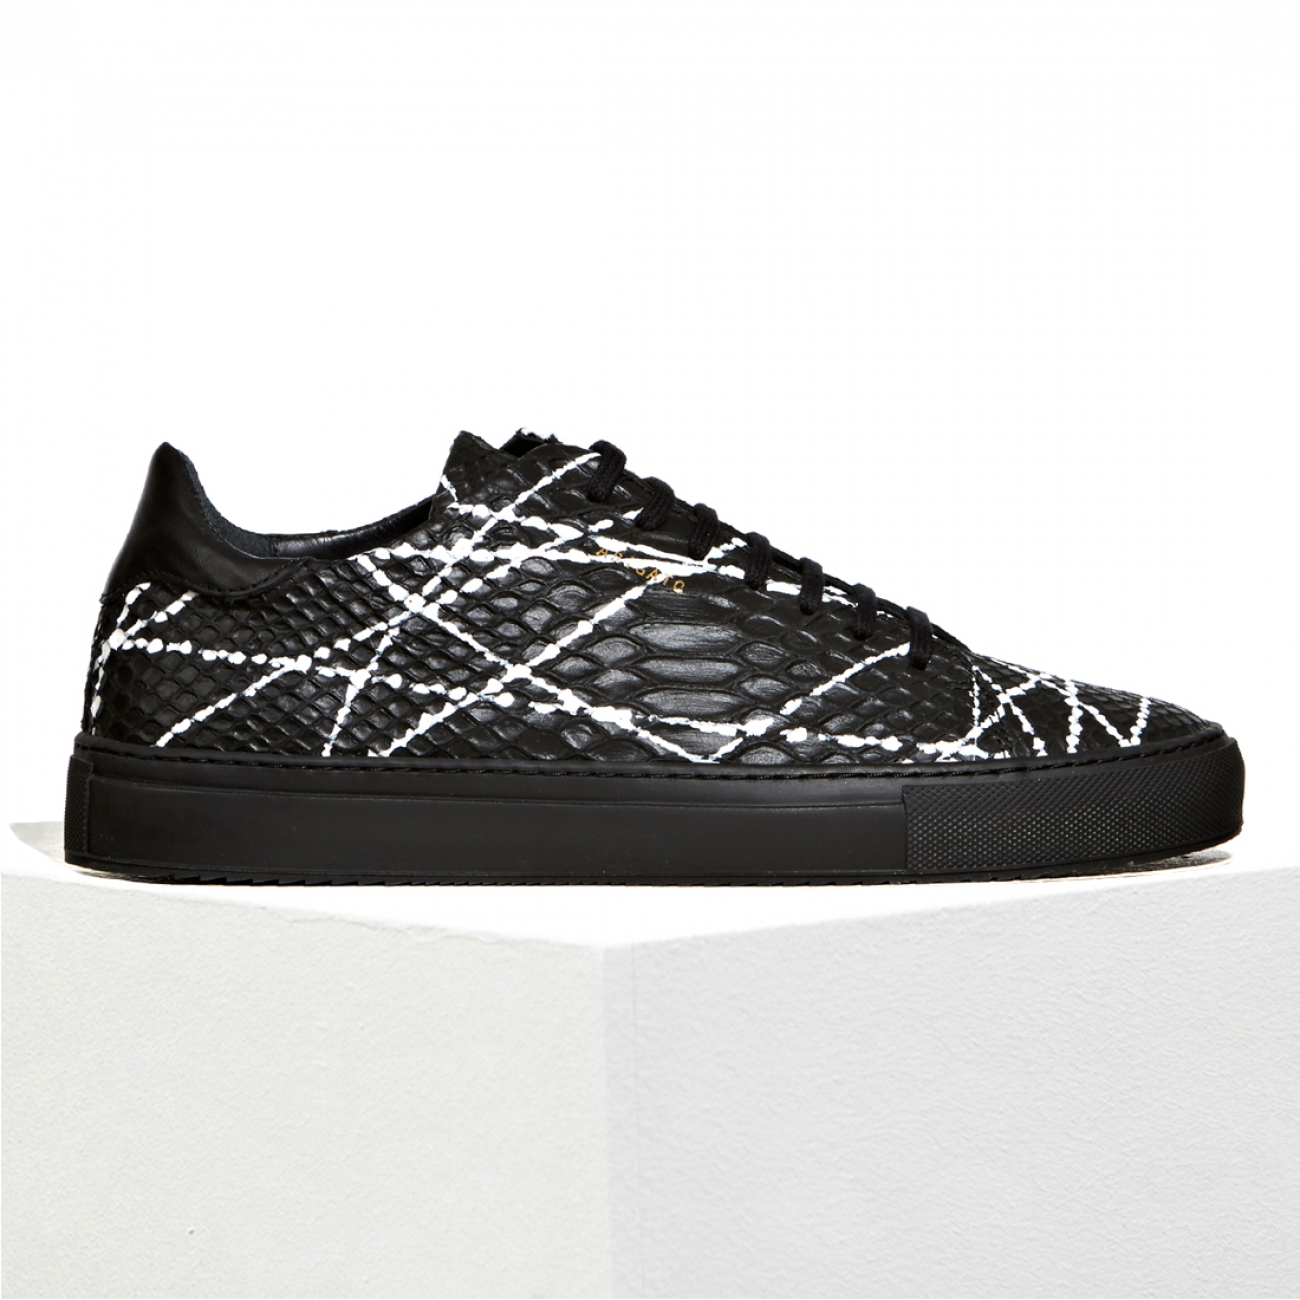 Layered Up For Winter: Axel Arigato Black Python Embossed Leather Clean ...